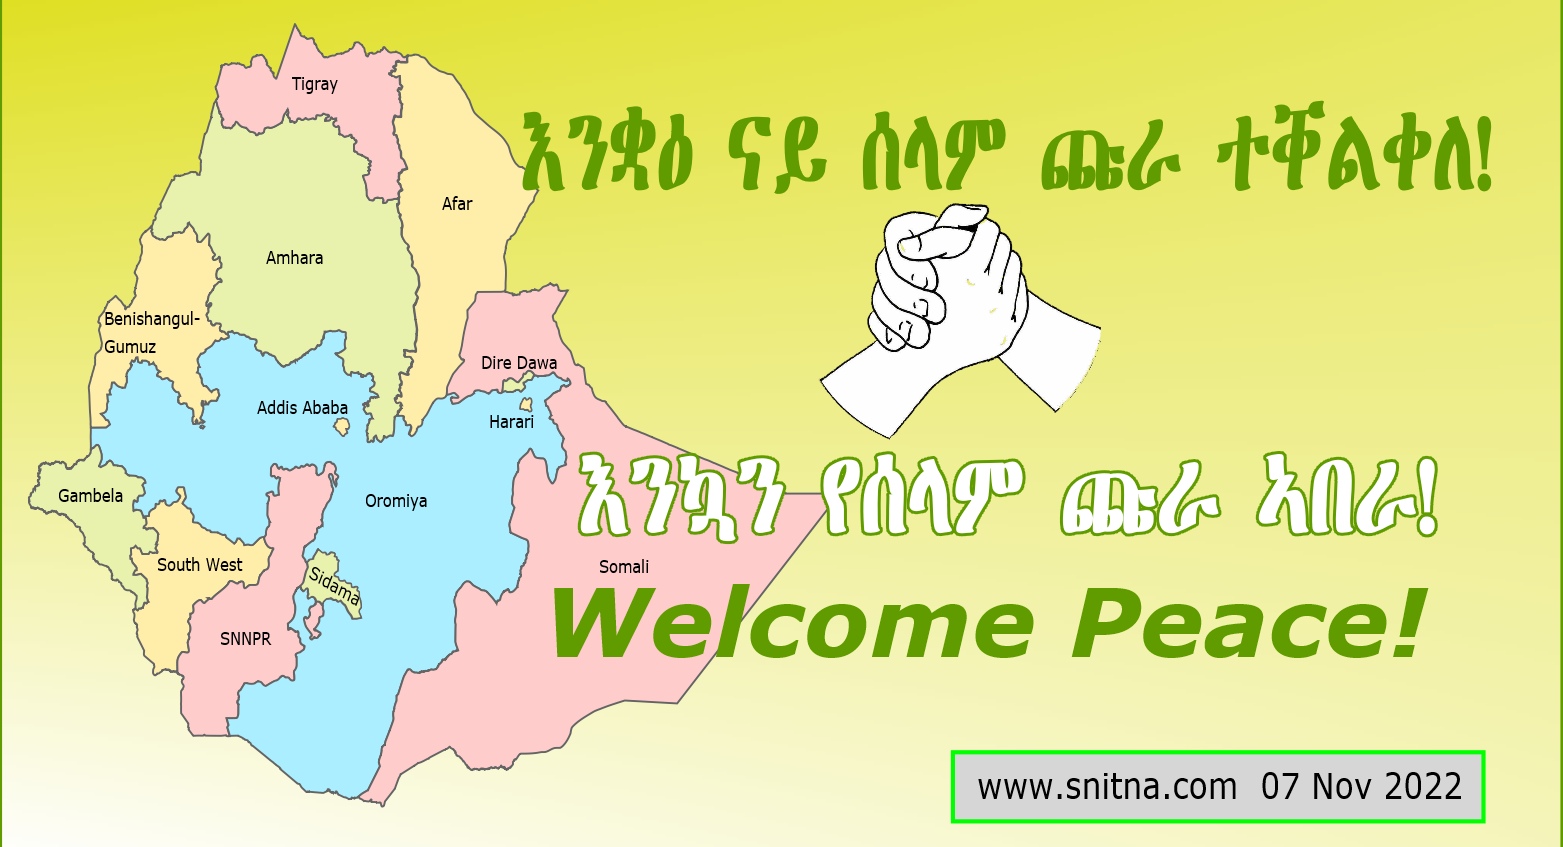 Congratulations on the Ethiopian conflicting parties' peace agreement.